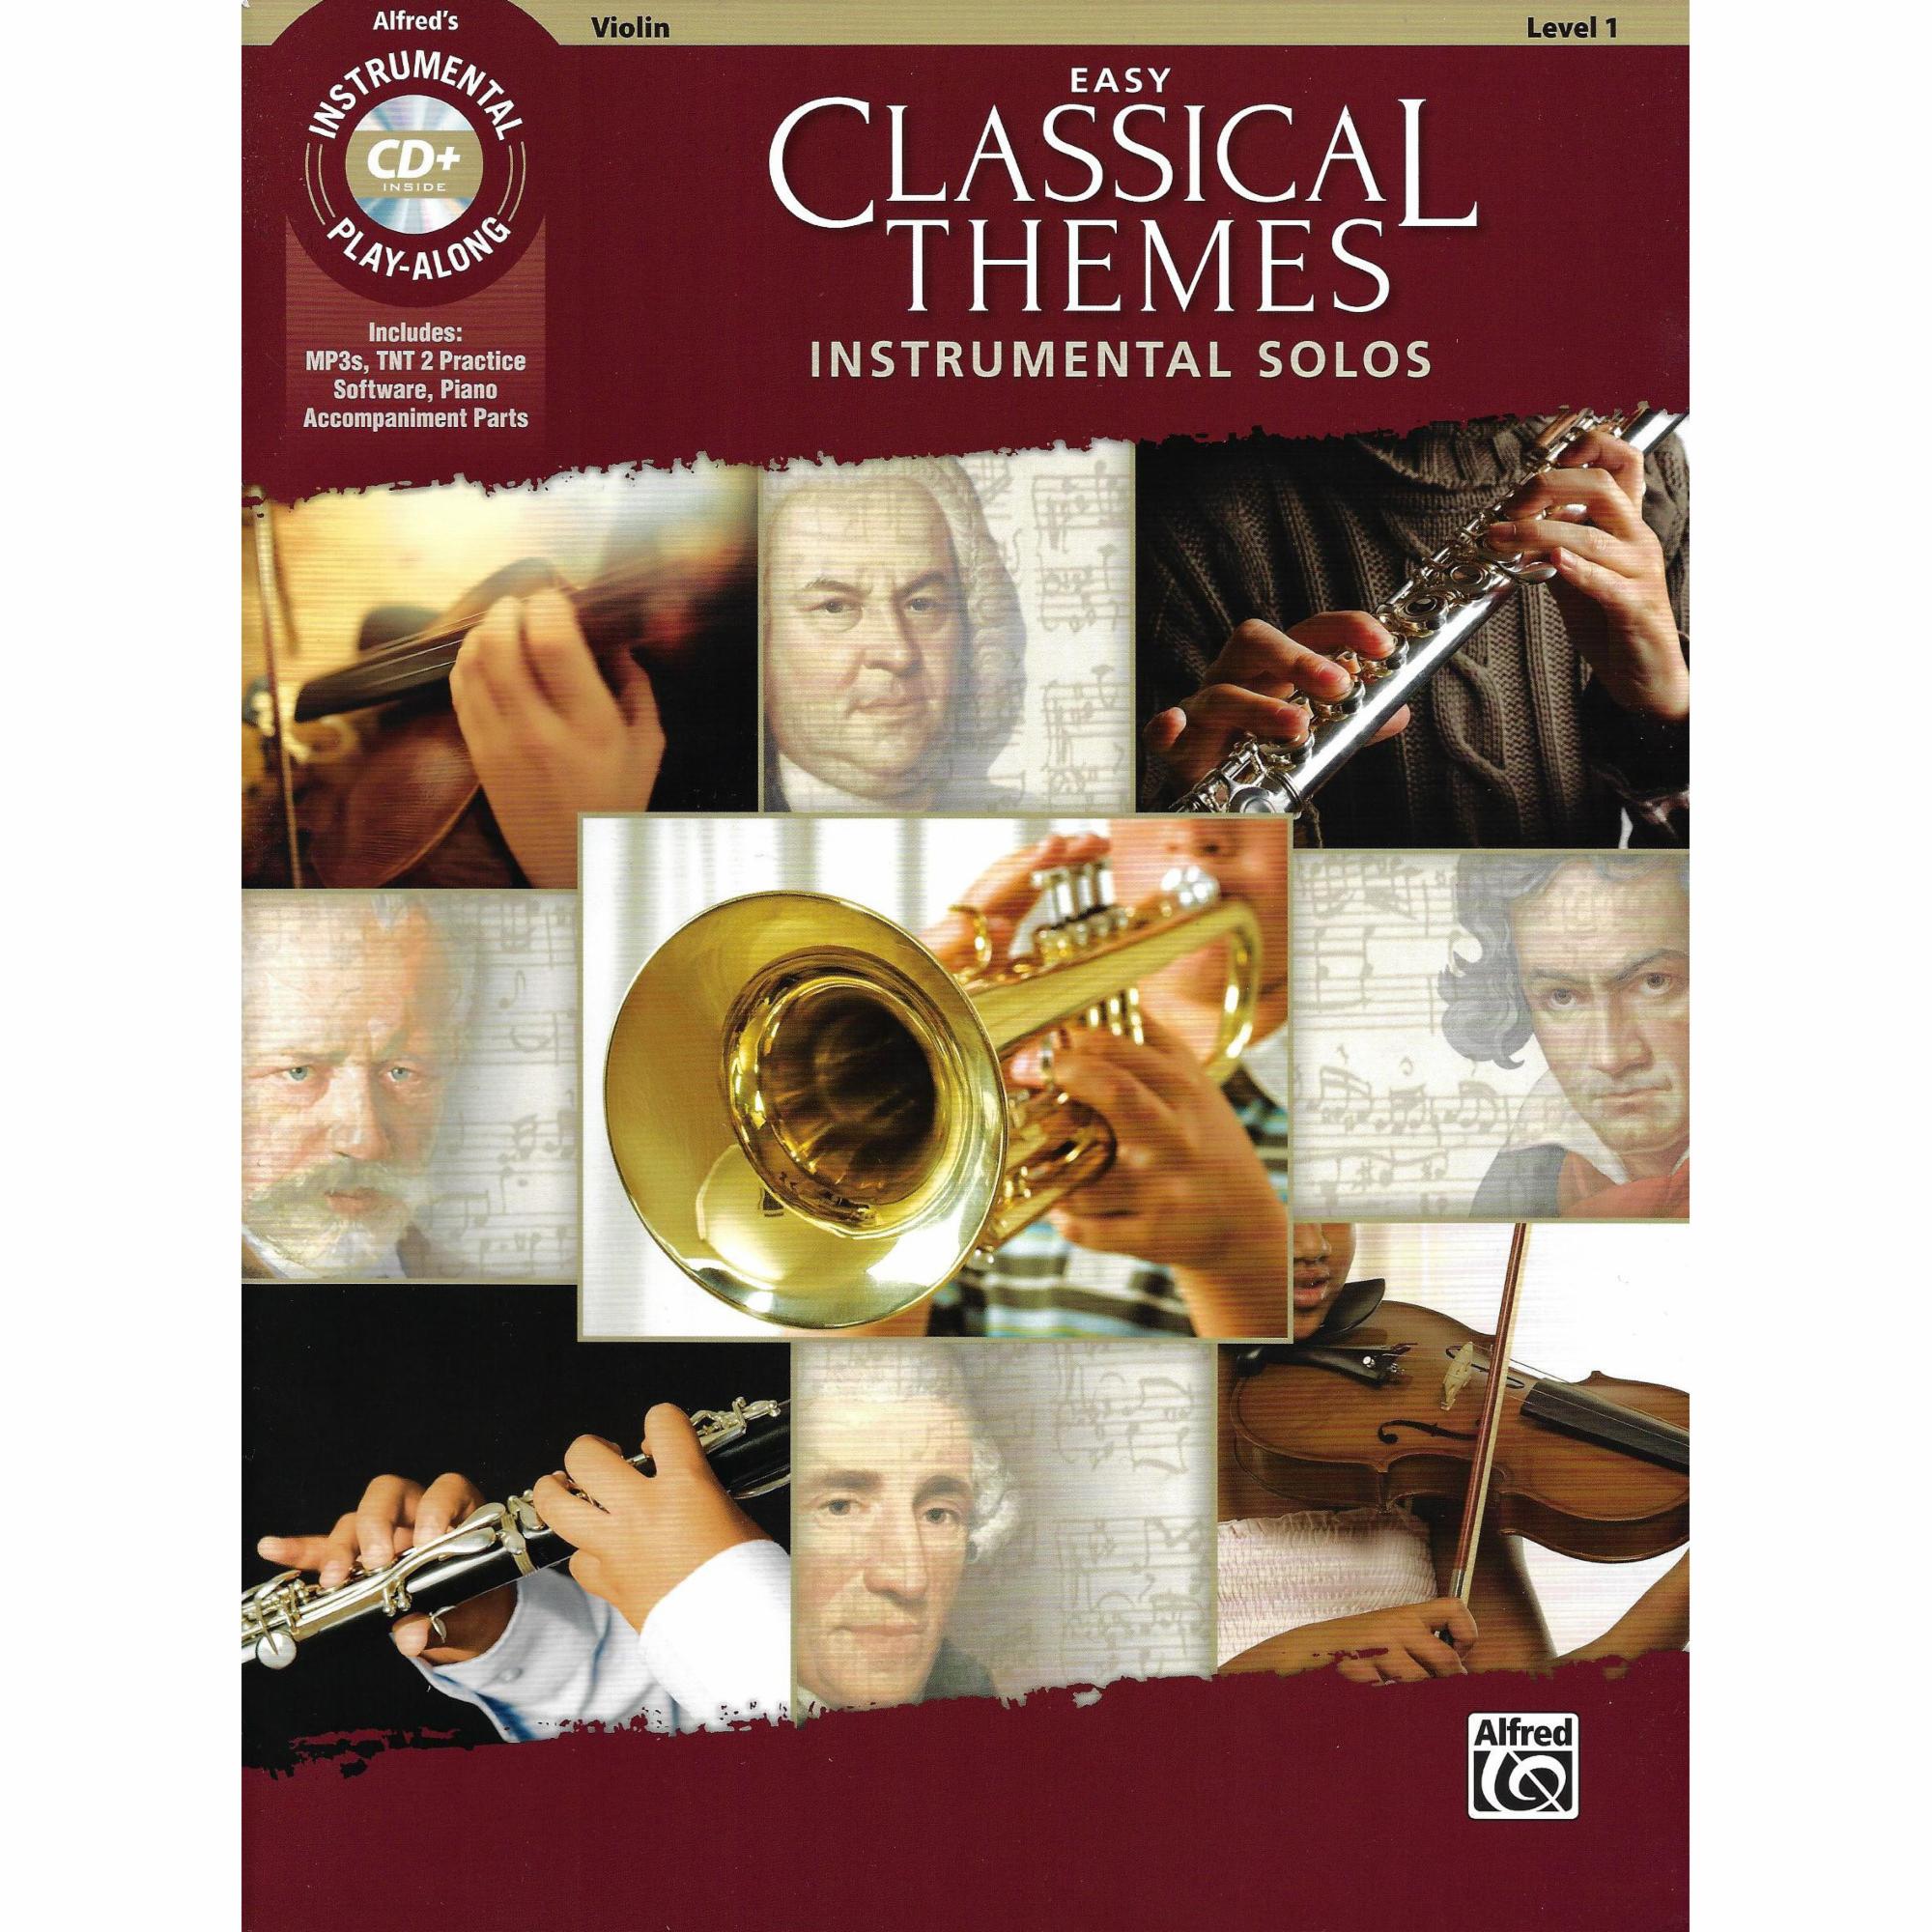 Easy Classical Themes for Violin, Viola, or Cello